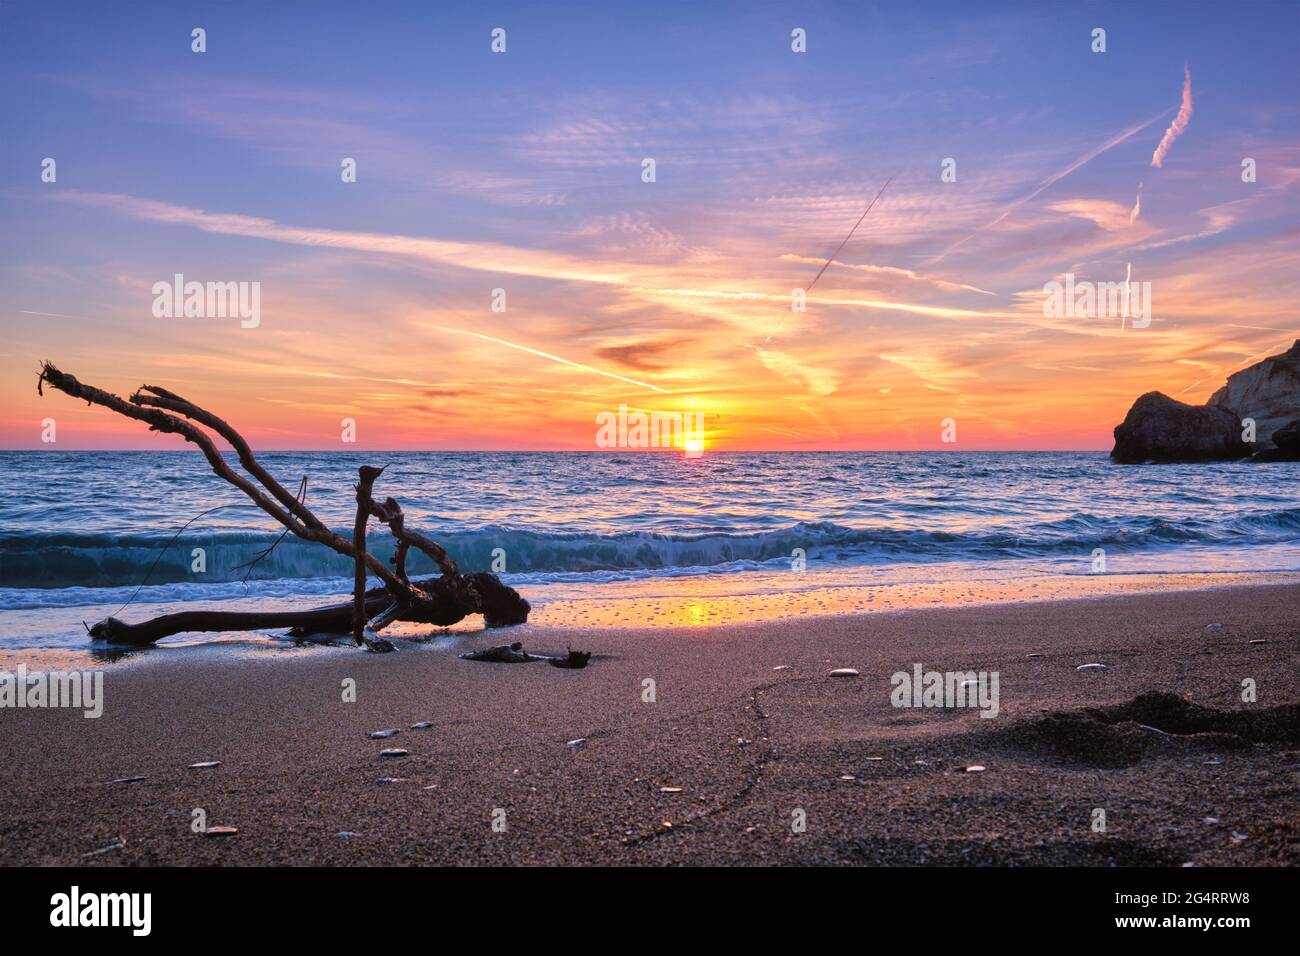 ld wood trunk snag in water at beach on beautiful sunset Stock Photo